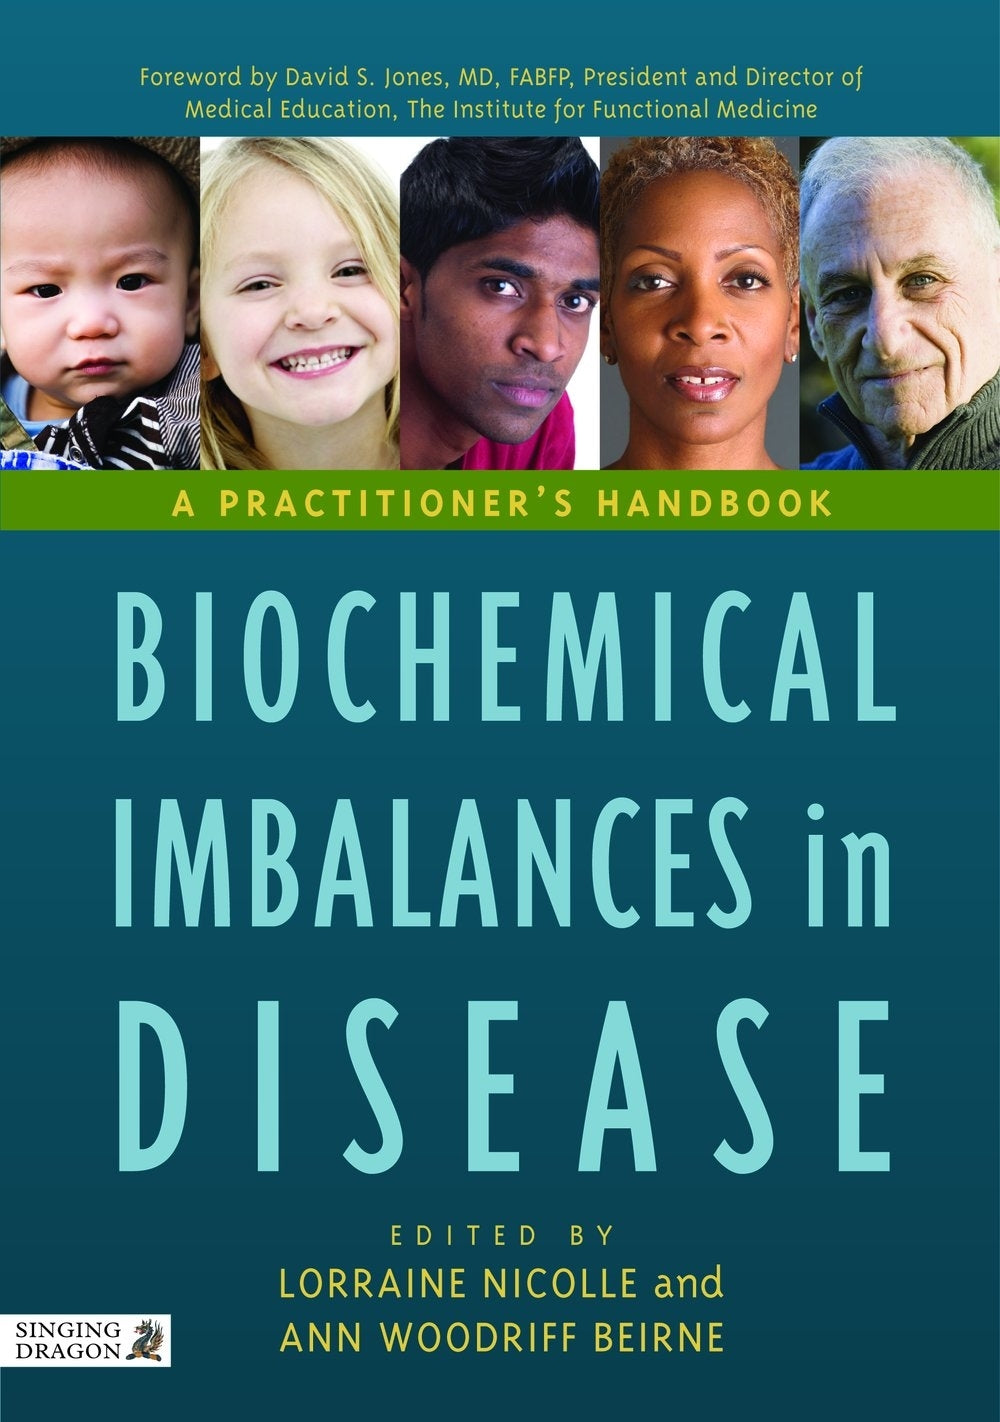 Biochemical Imbalances in Disease by Ann Woodriff Beirne, Lorraine Nicolle, No Author Listed